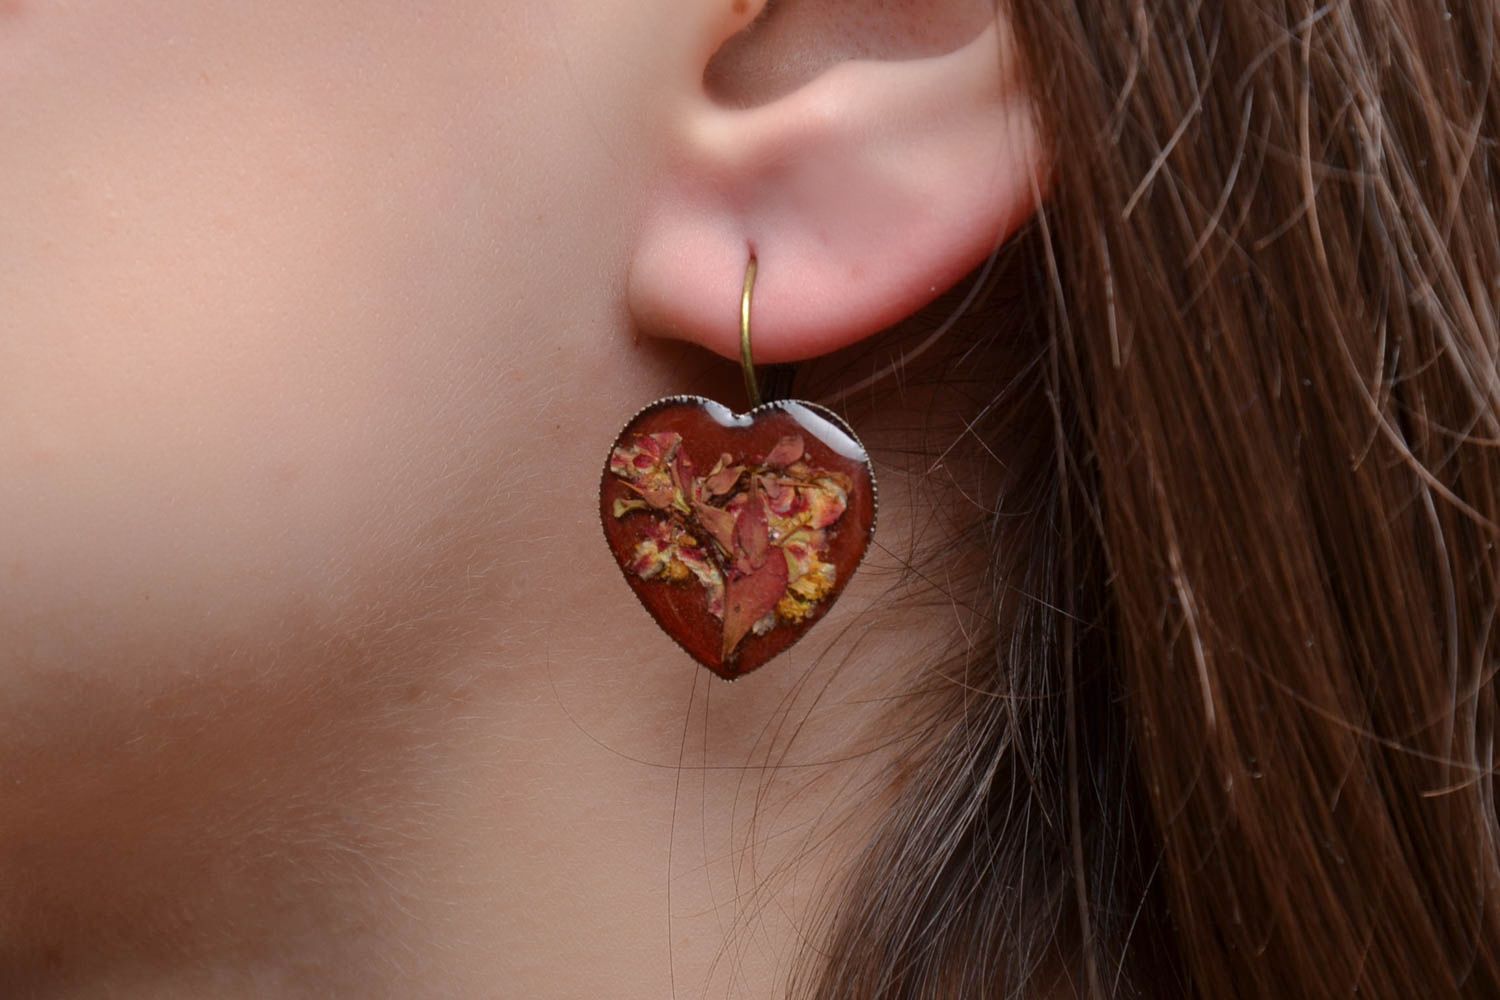 Heart-shaped earrings with natural flowers photo 2